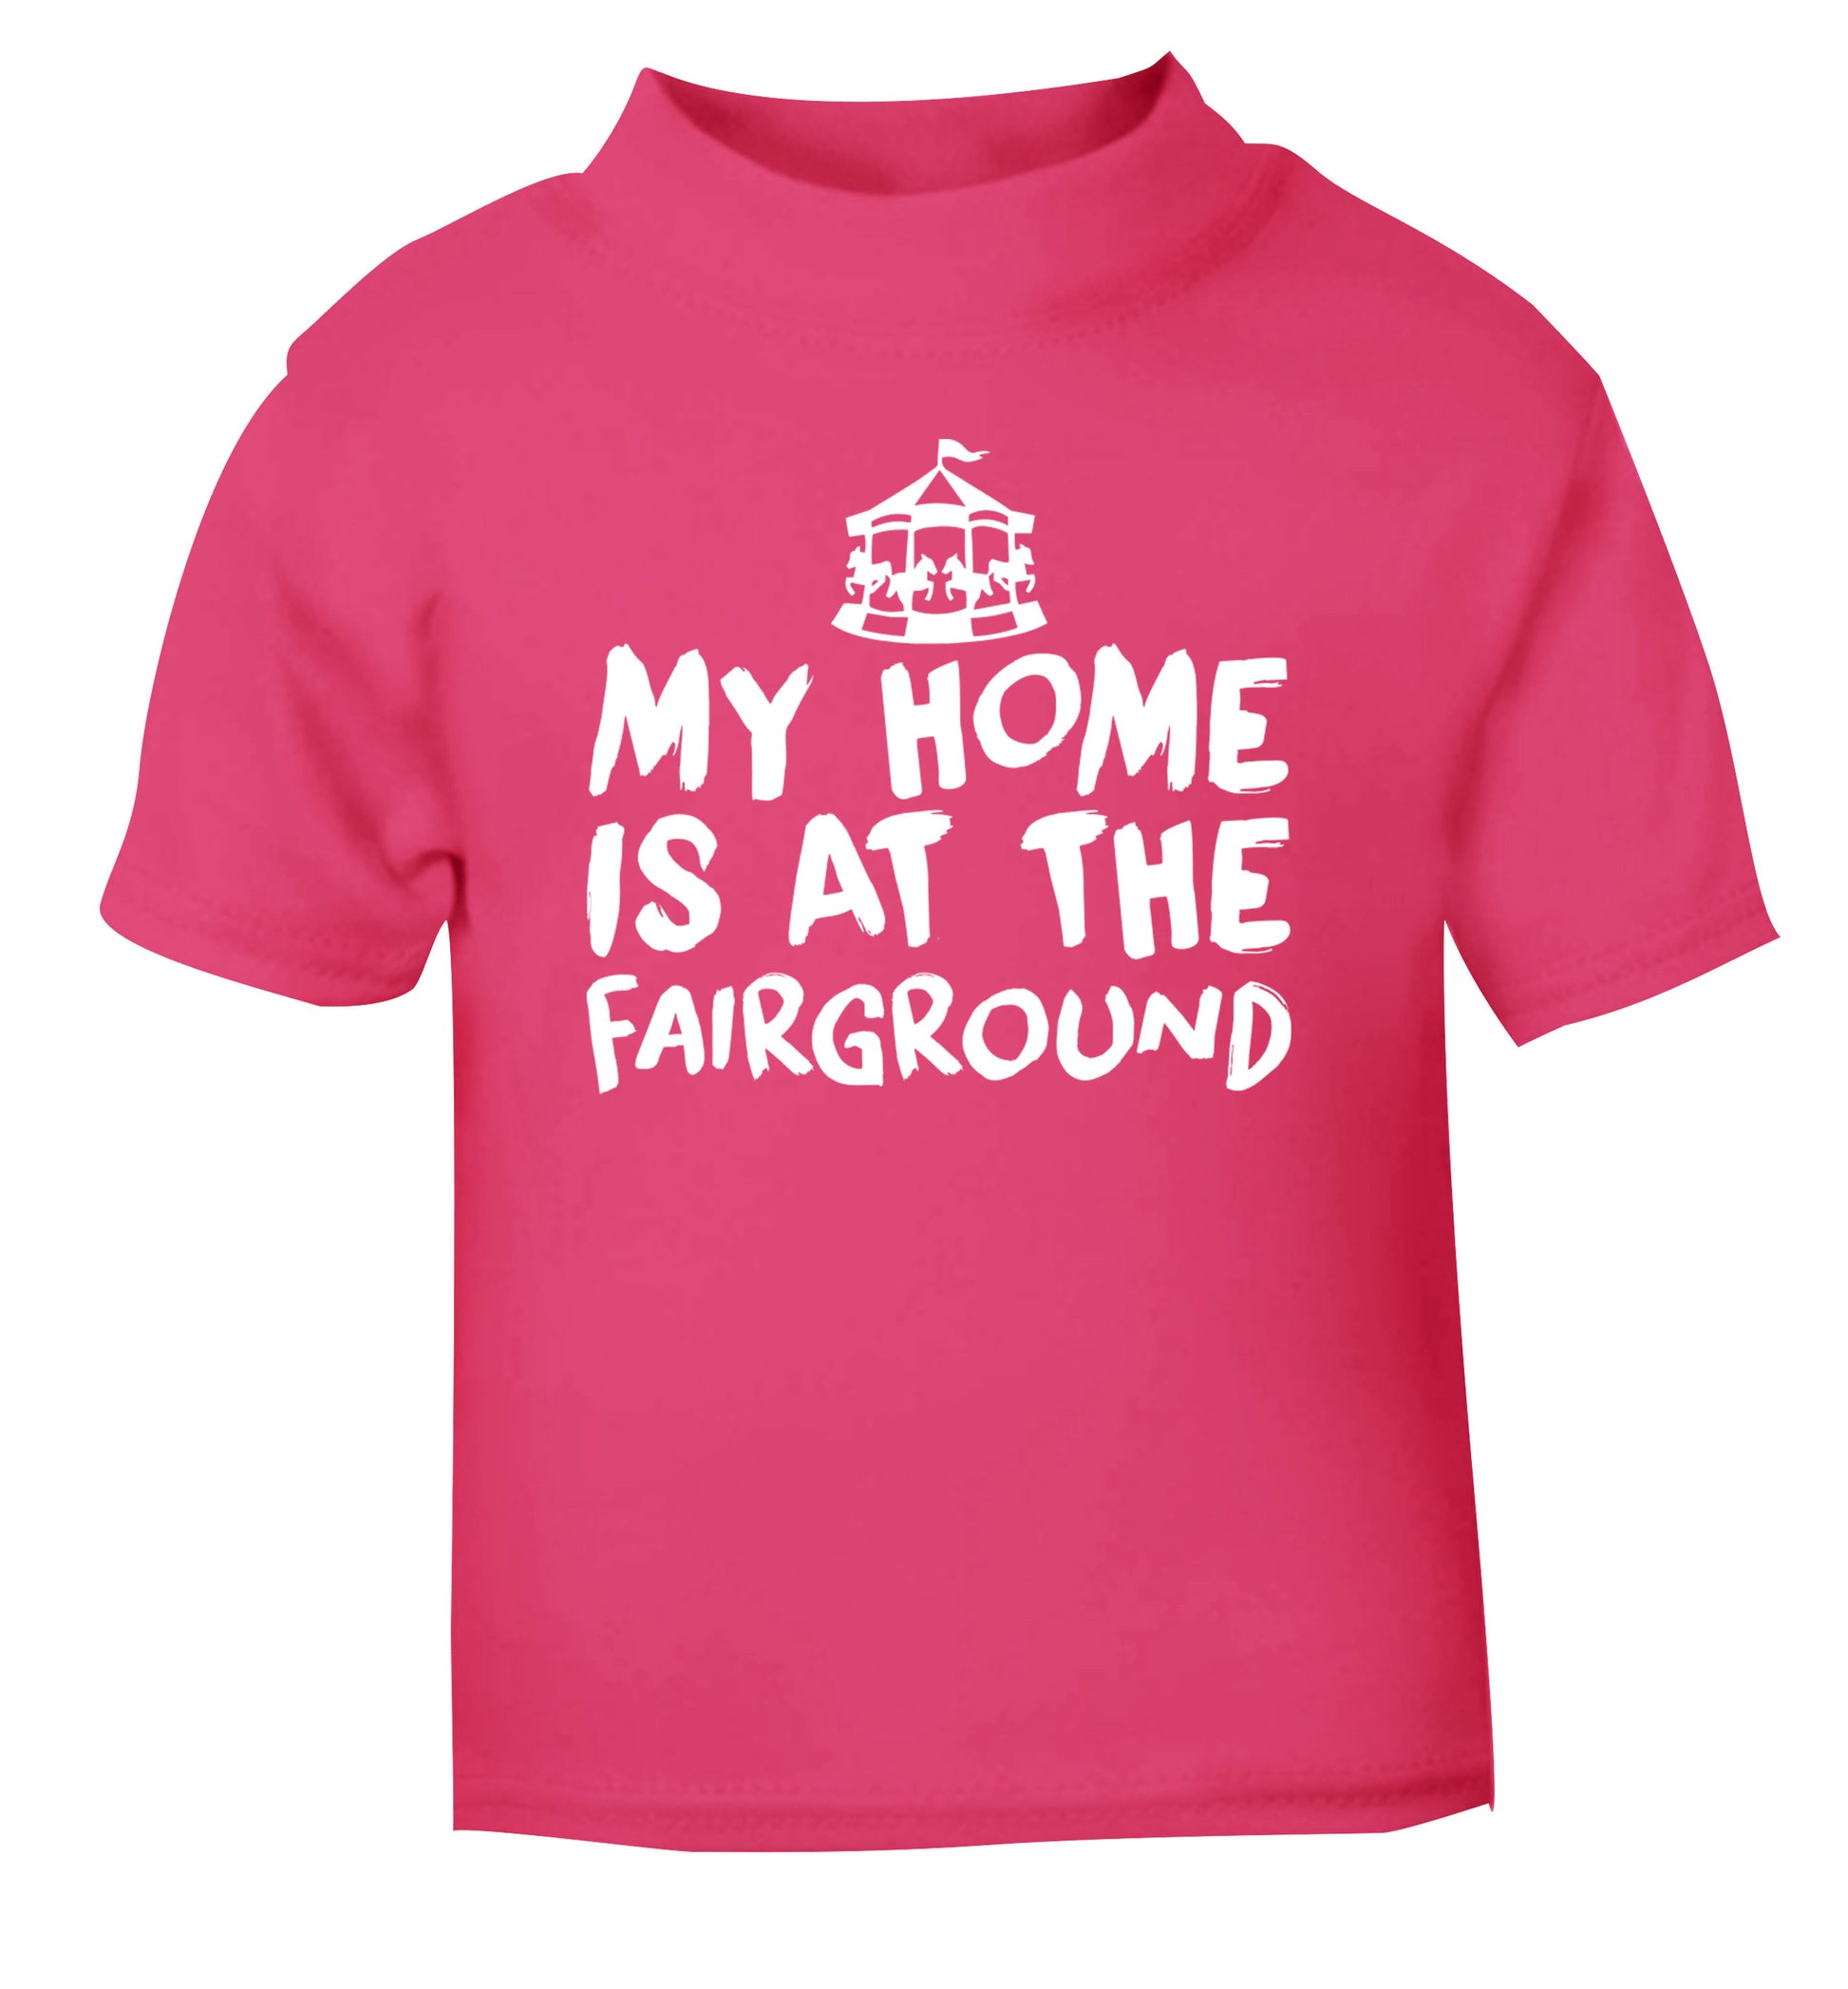 My home is at the fairground pink Baby Toddler Tshirt 2 Years